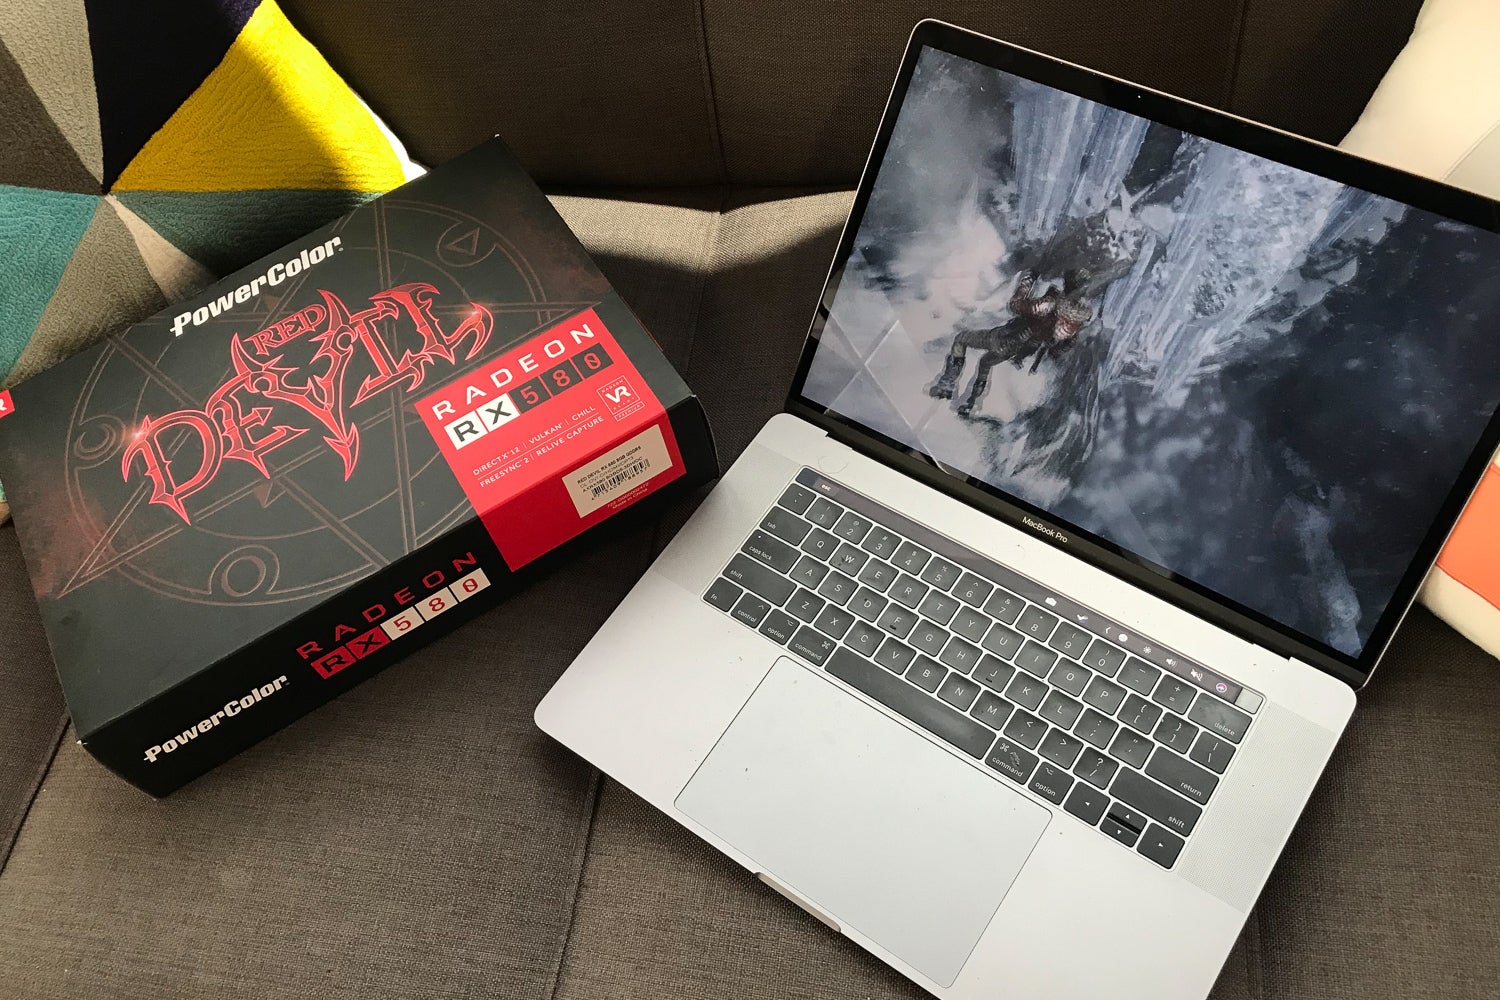 yes egpus boost mac game performance but limitations abound - run fortnite on macbook pro